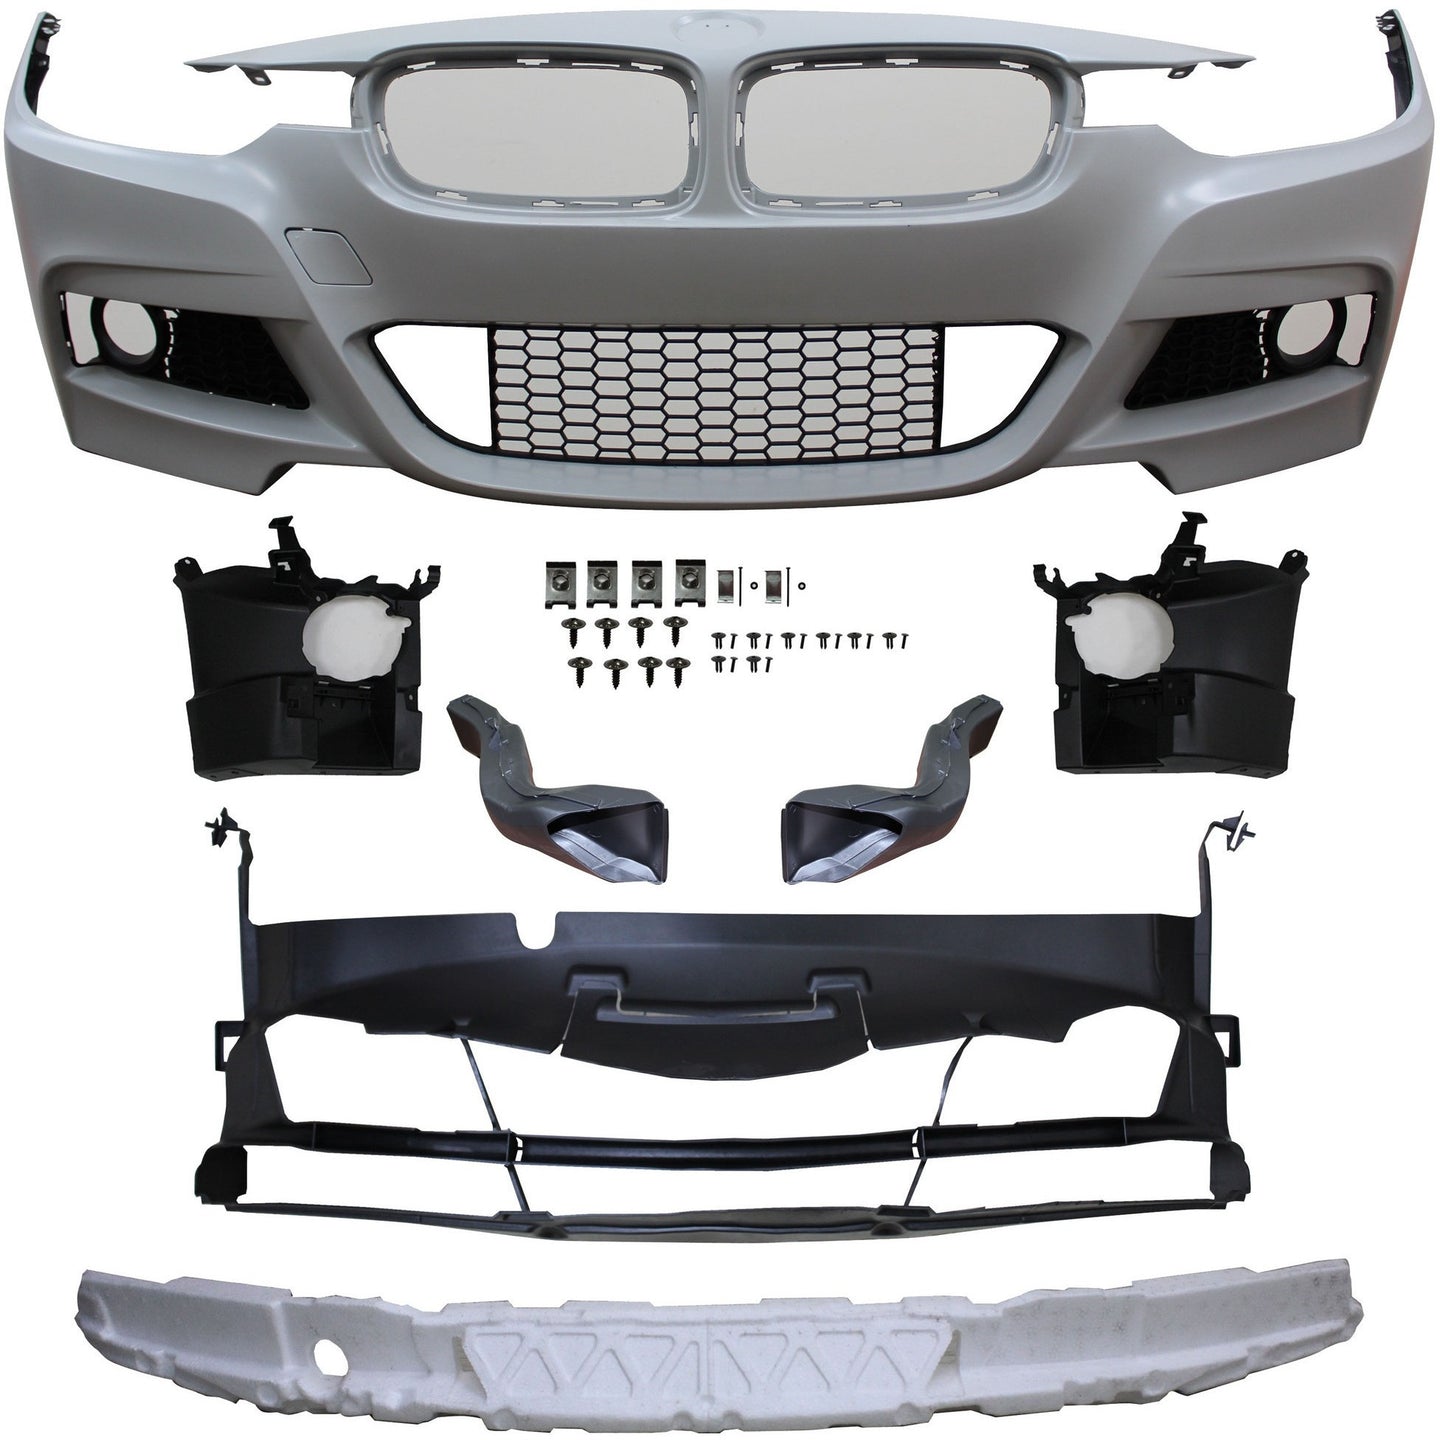 Bmw F30 M Sport Kit Front Bumper Sold Out Free M Performance Plastic Aeuroplug